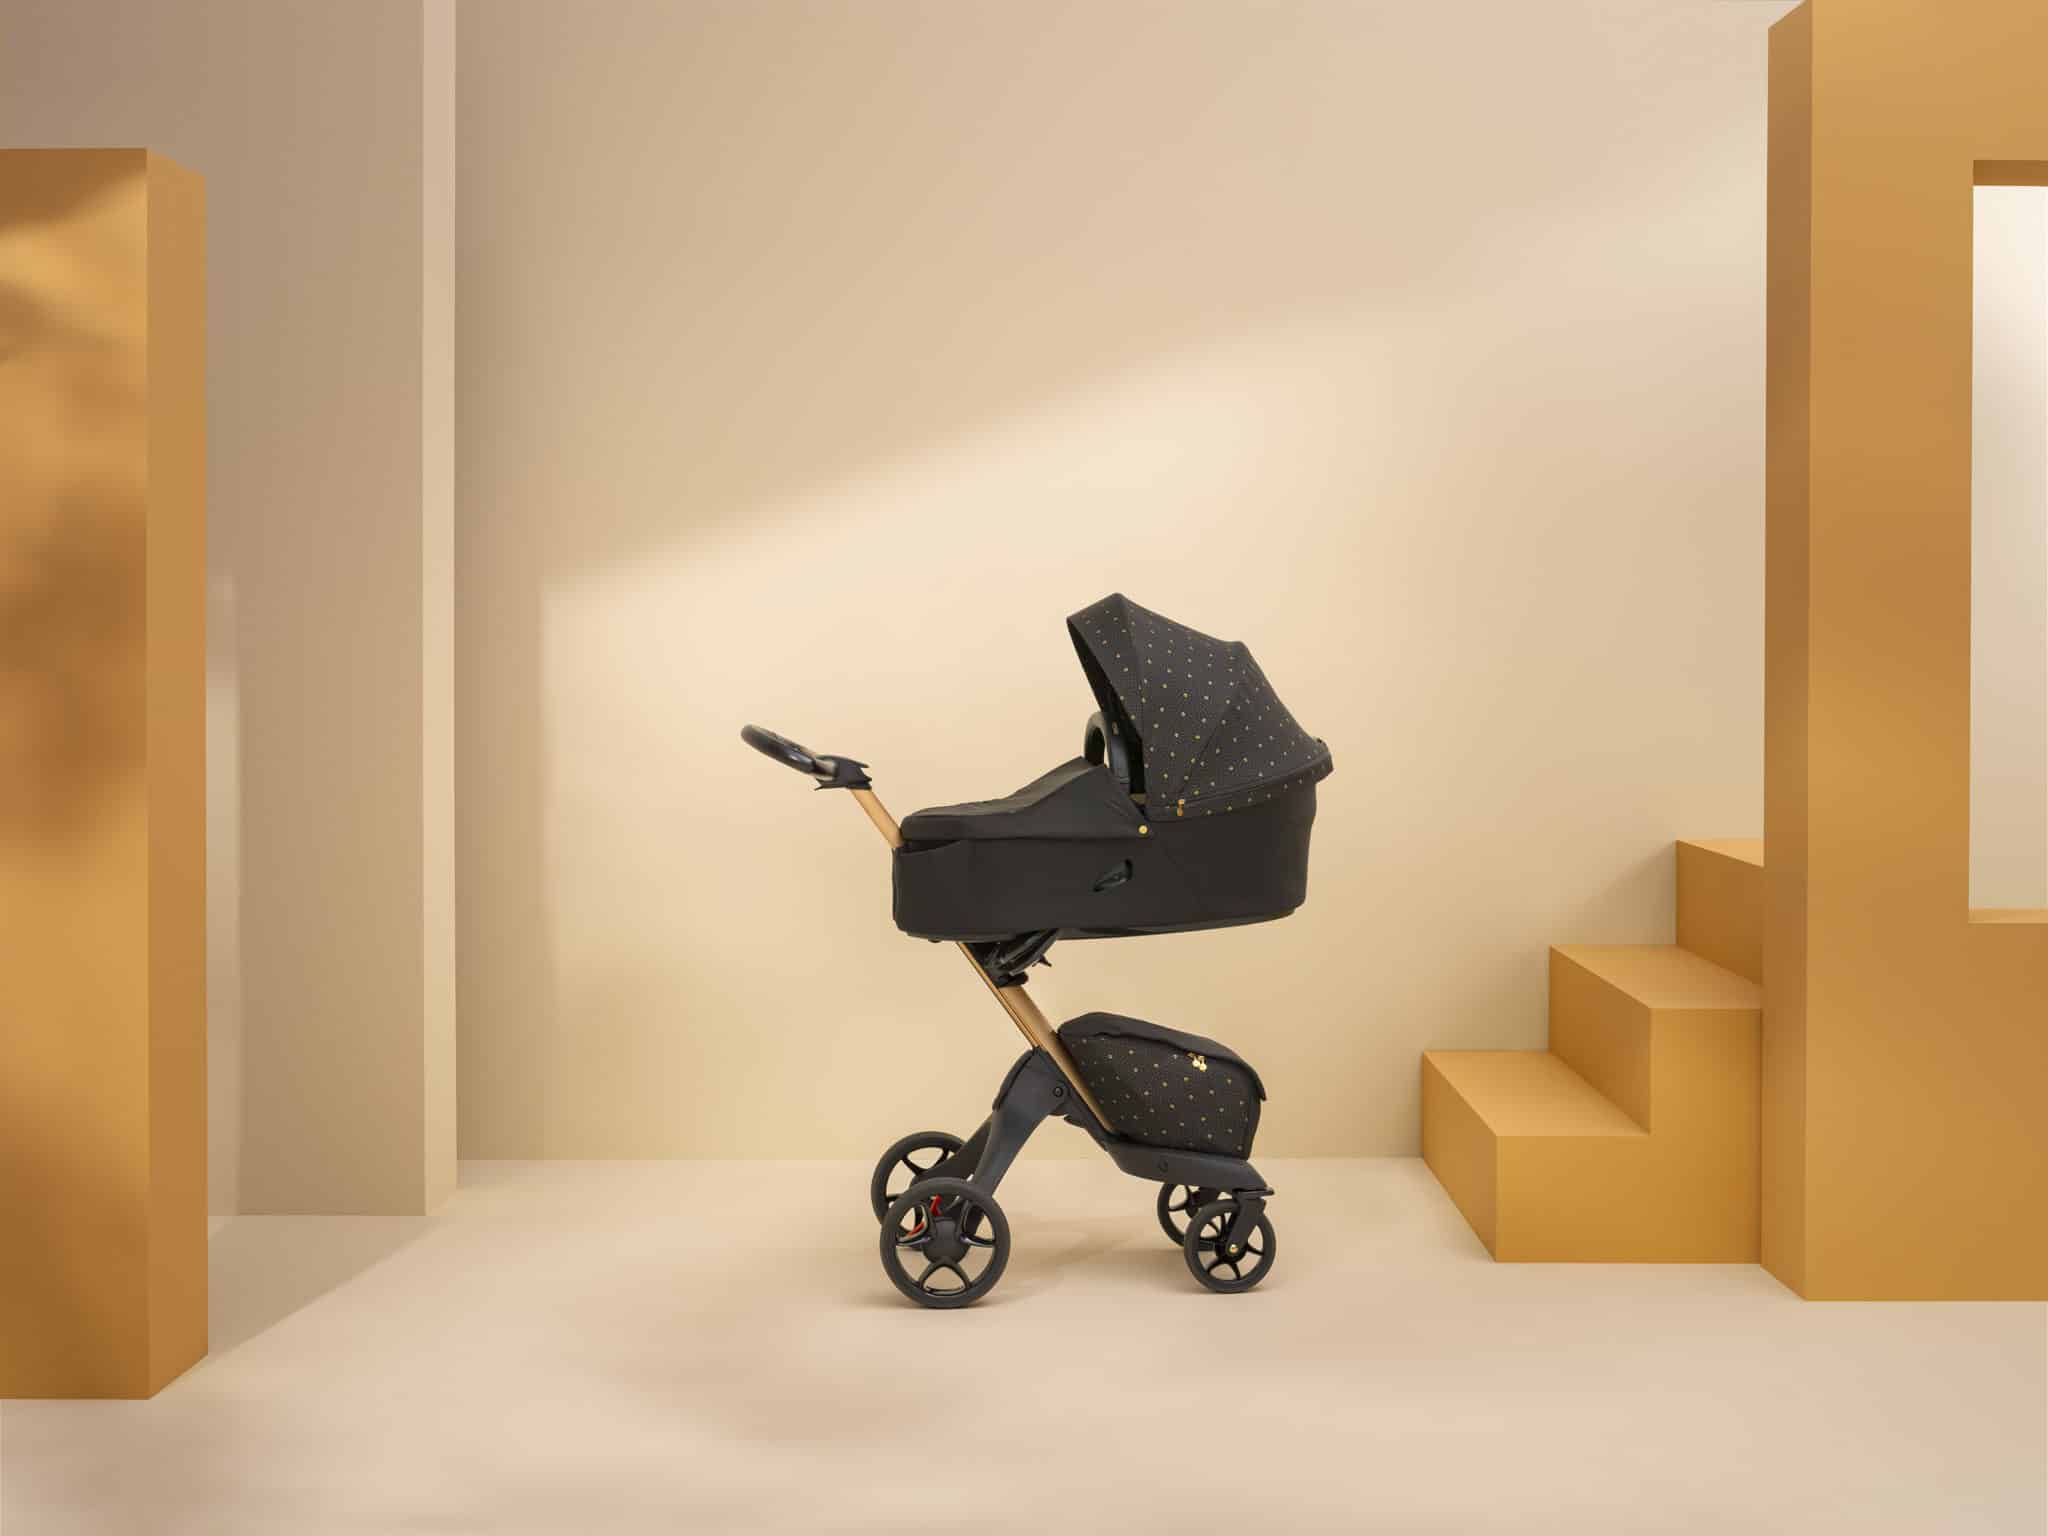 Introducing the new Stokke® Xplory® X Signature Stroller -